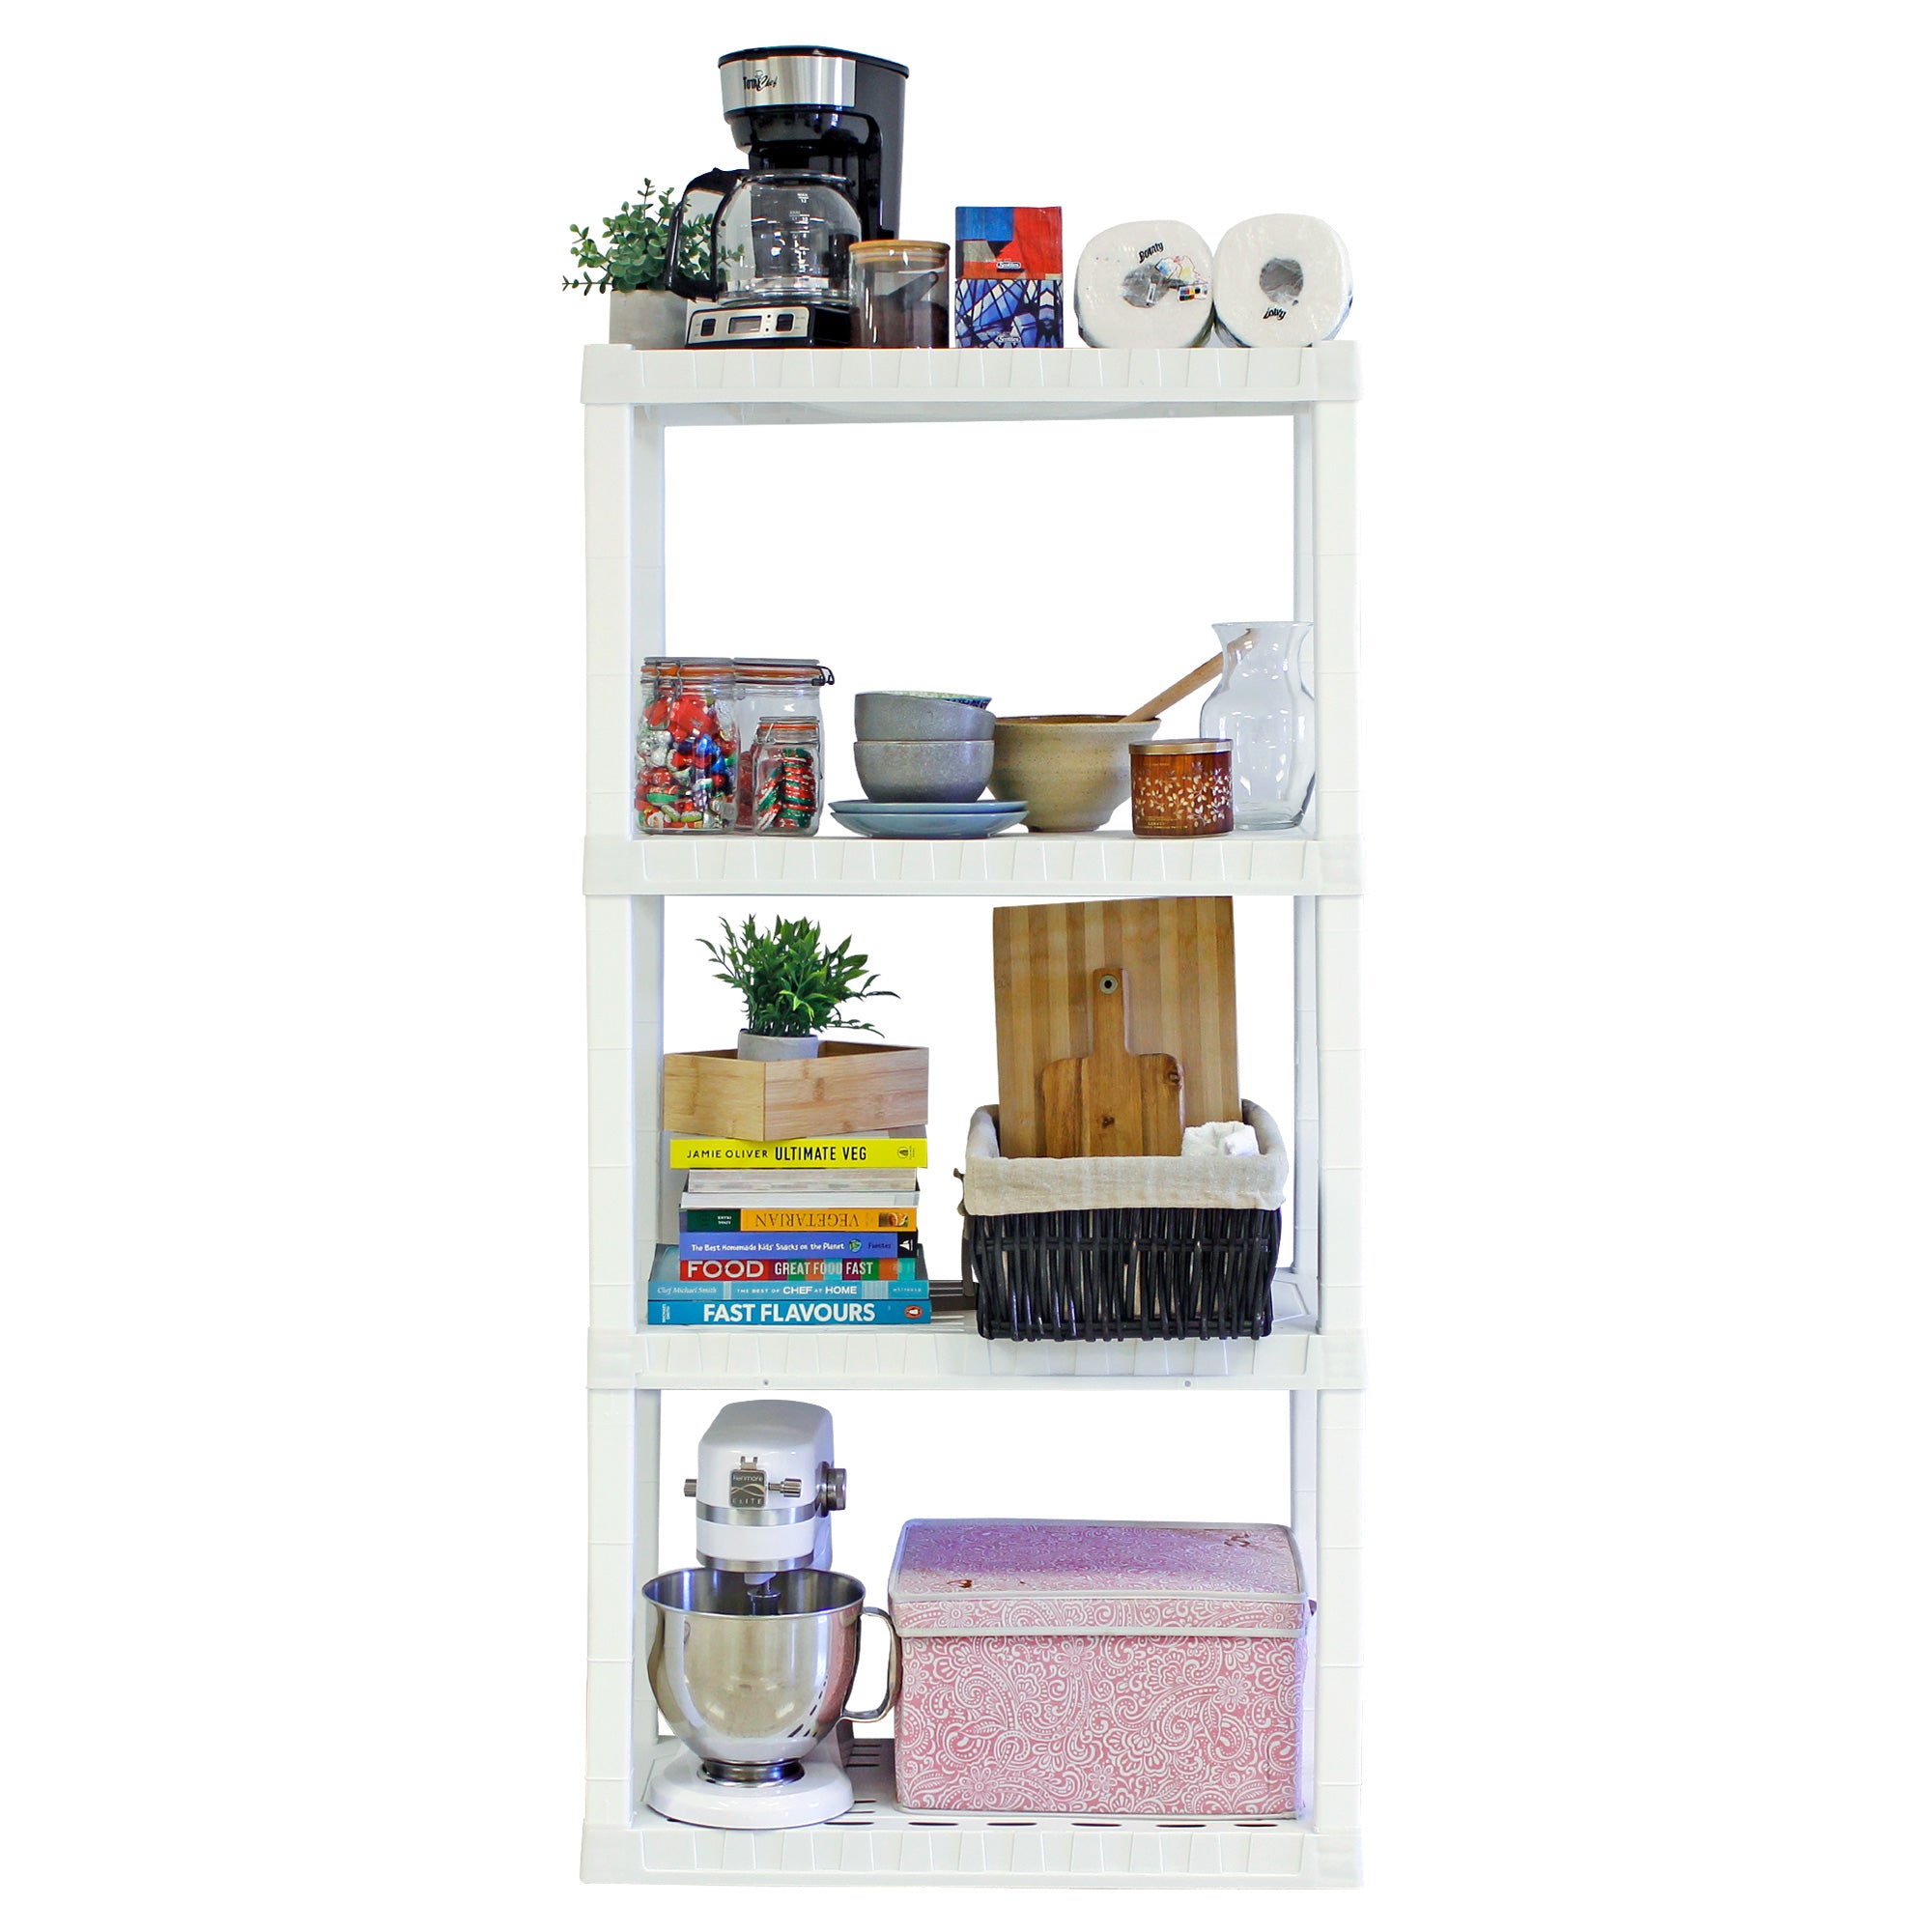 Oskar 4-Tier Storage Shelf, Holds 180 kg, H 145 X W 76 X D 36 CM, Multipurpose Organizer for Cellar, Basement, Utility Shed, Workshop, Tool-Free Assembly, Made With Recycled Materials, White